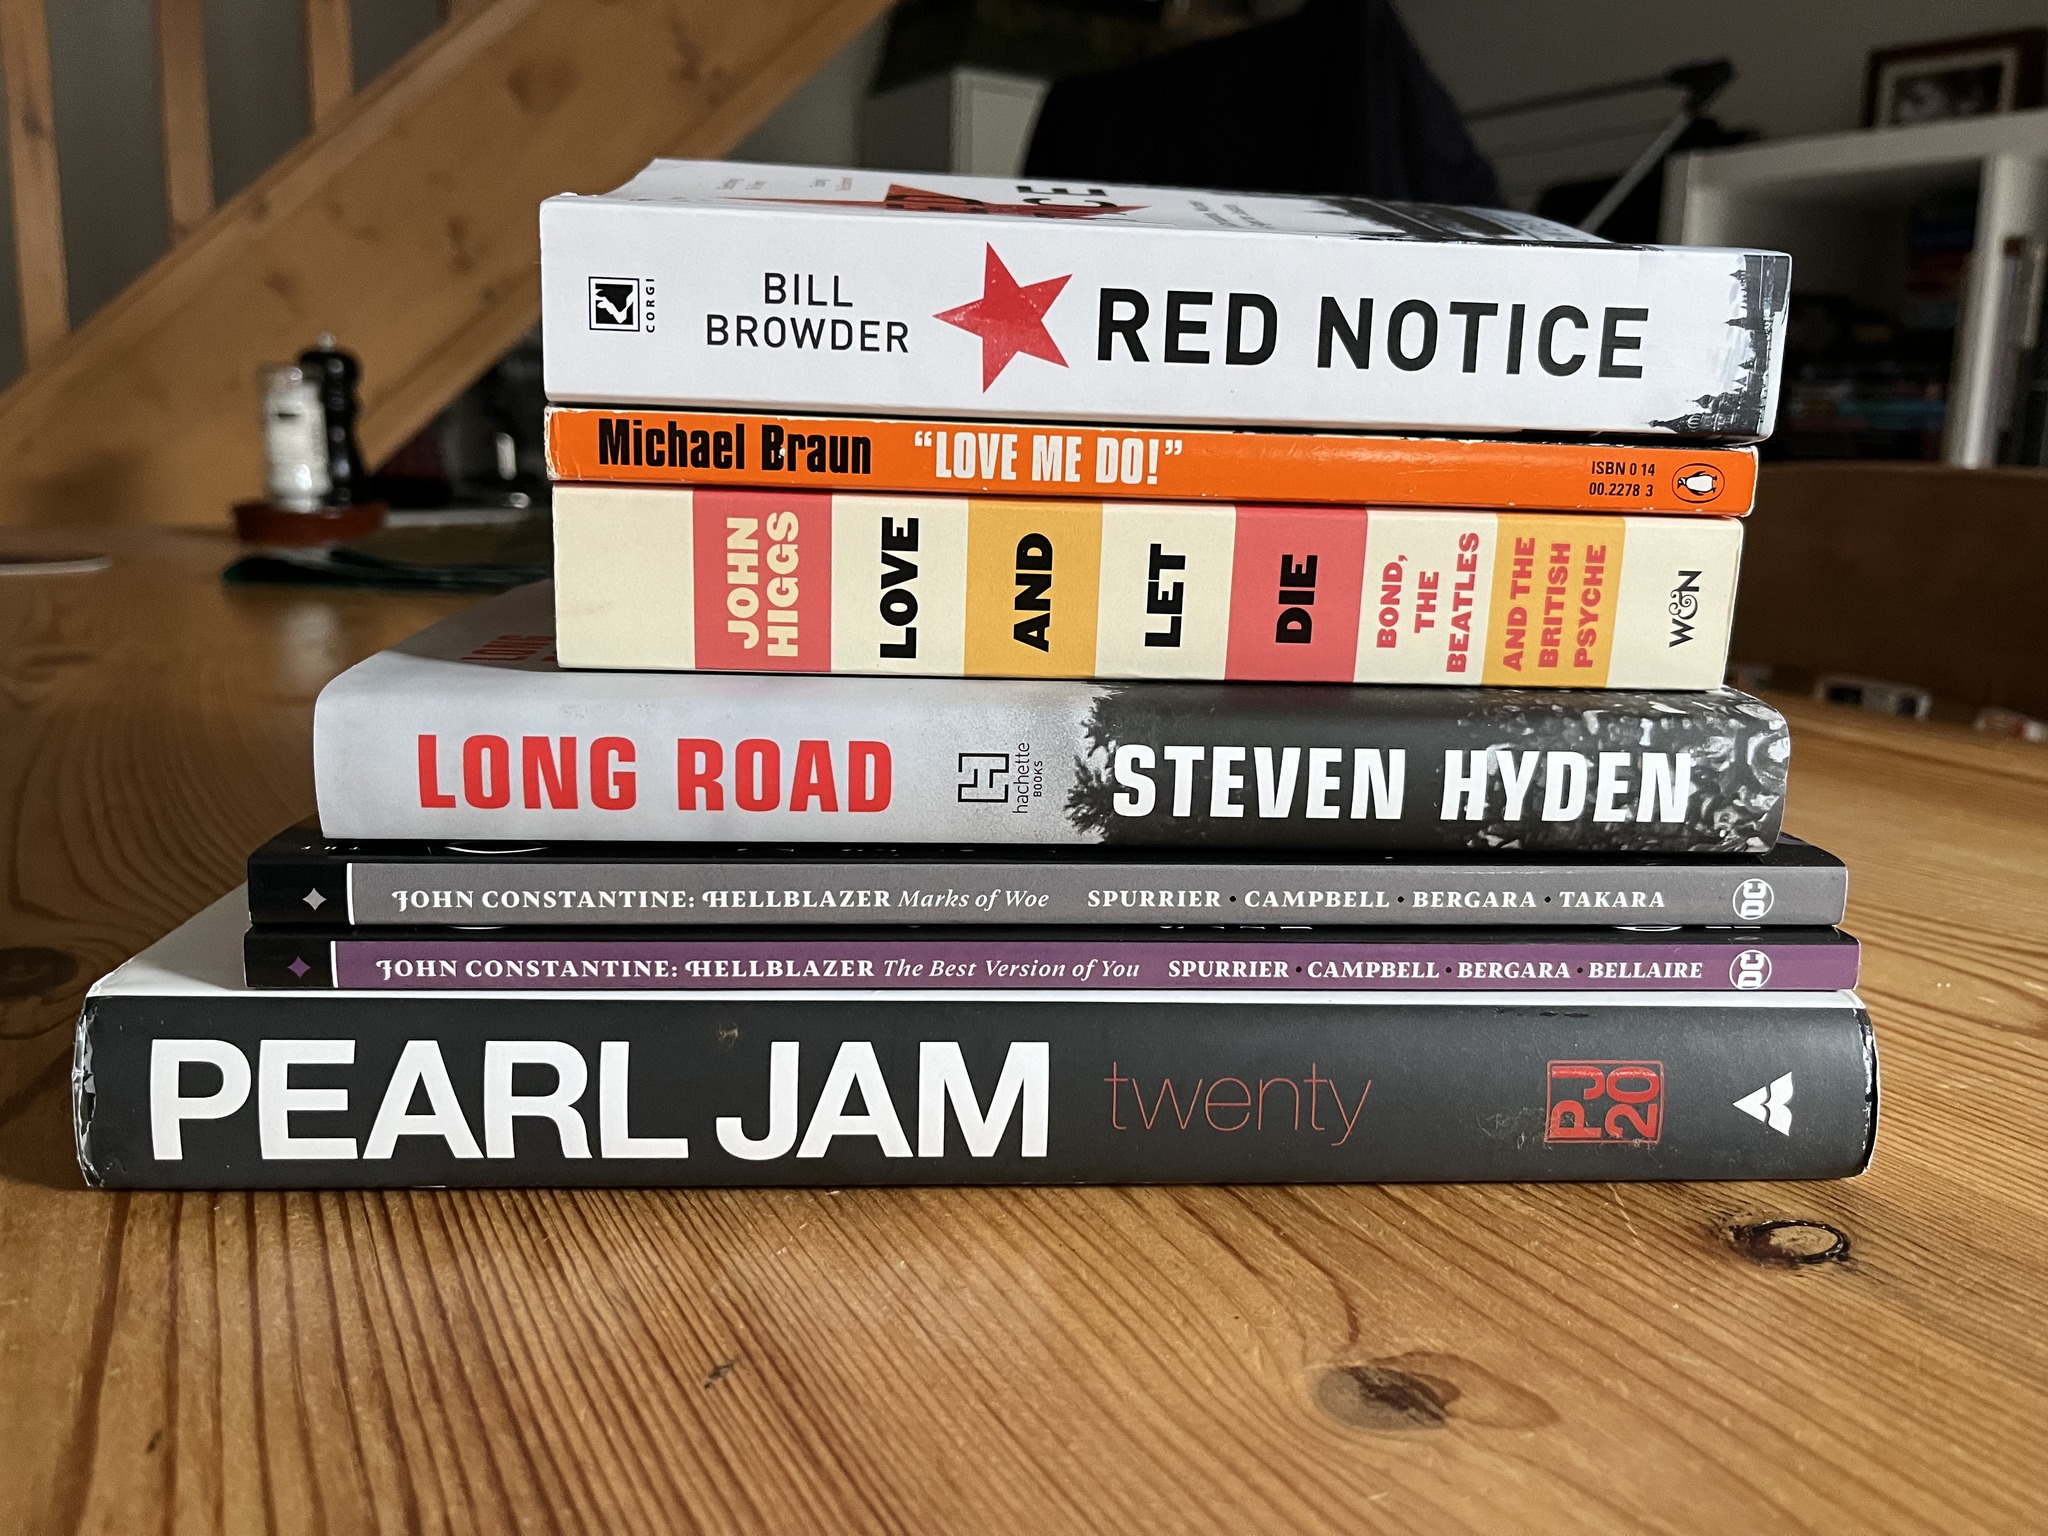 A pile of books that I read this month. A large format book about Pearl Jam called 20, and a hardback book about them by Stephen Hayden called Long Road. Two Hellblazer comic book collections Simon Spuirrier’s run on the title. John Higgs’ book about the Beatles and Bond, Love and let Die, and a contemporary book about the Beatles called Love me Do by Michael Braun. Finally, Bill Browder’s takedown of corruption and murder in Russia, Red Notice.